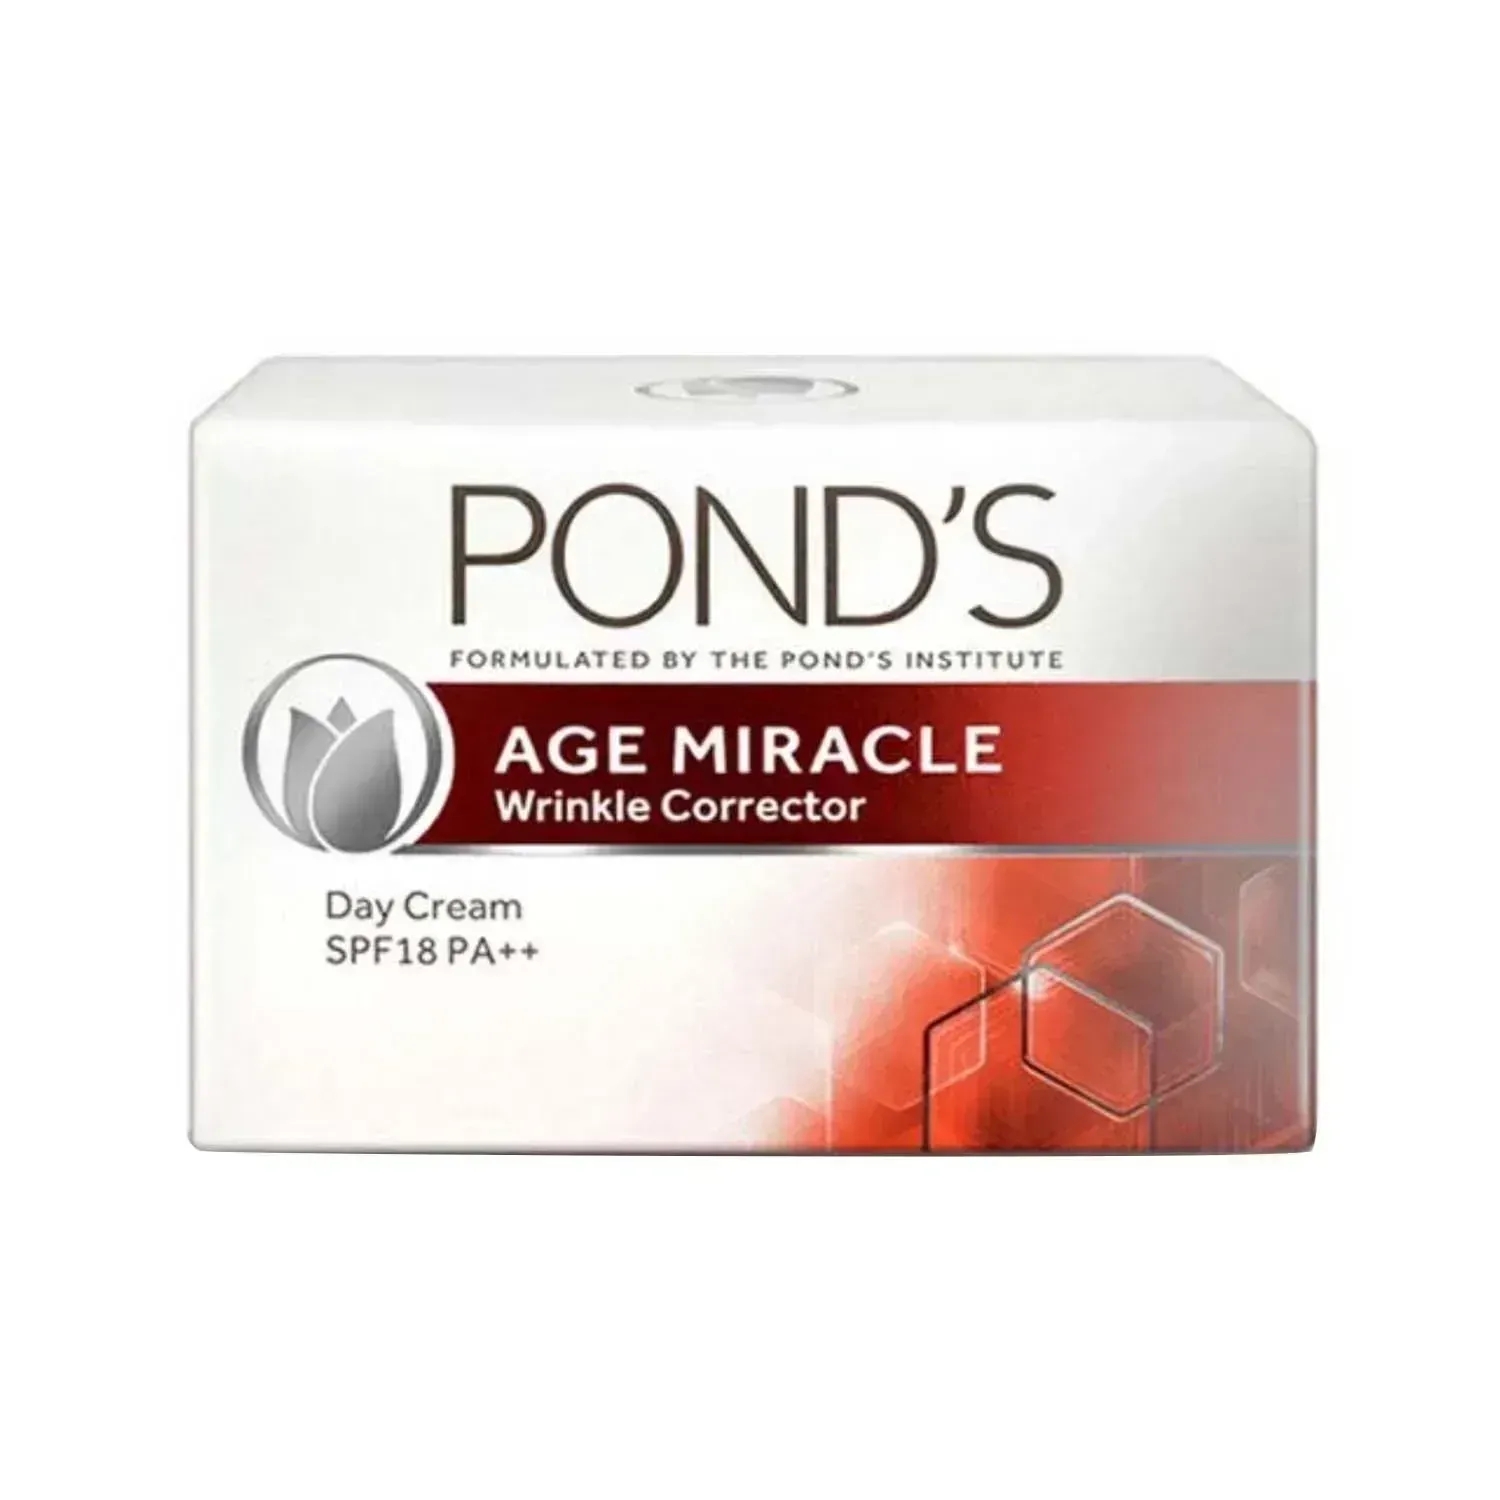 Pond's | Pond's Age Miracle Wrinkle Corrector Day Cream SPF 18 Pa++ (50g)